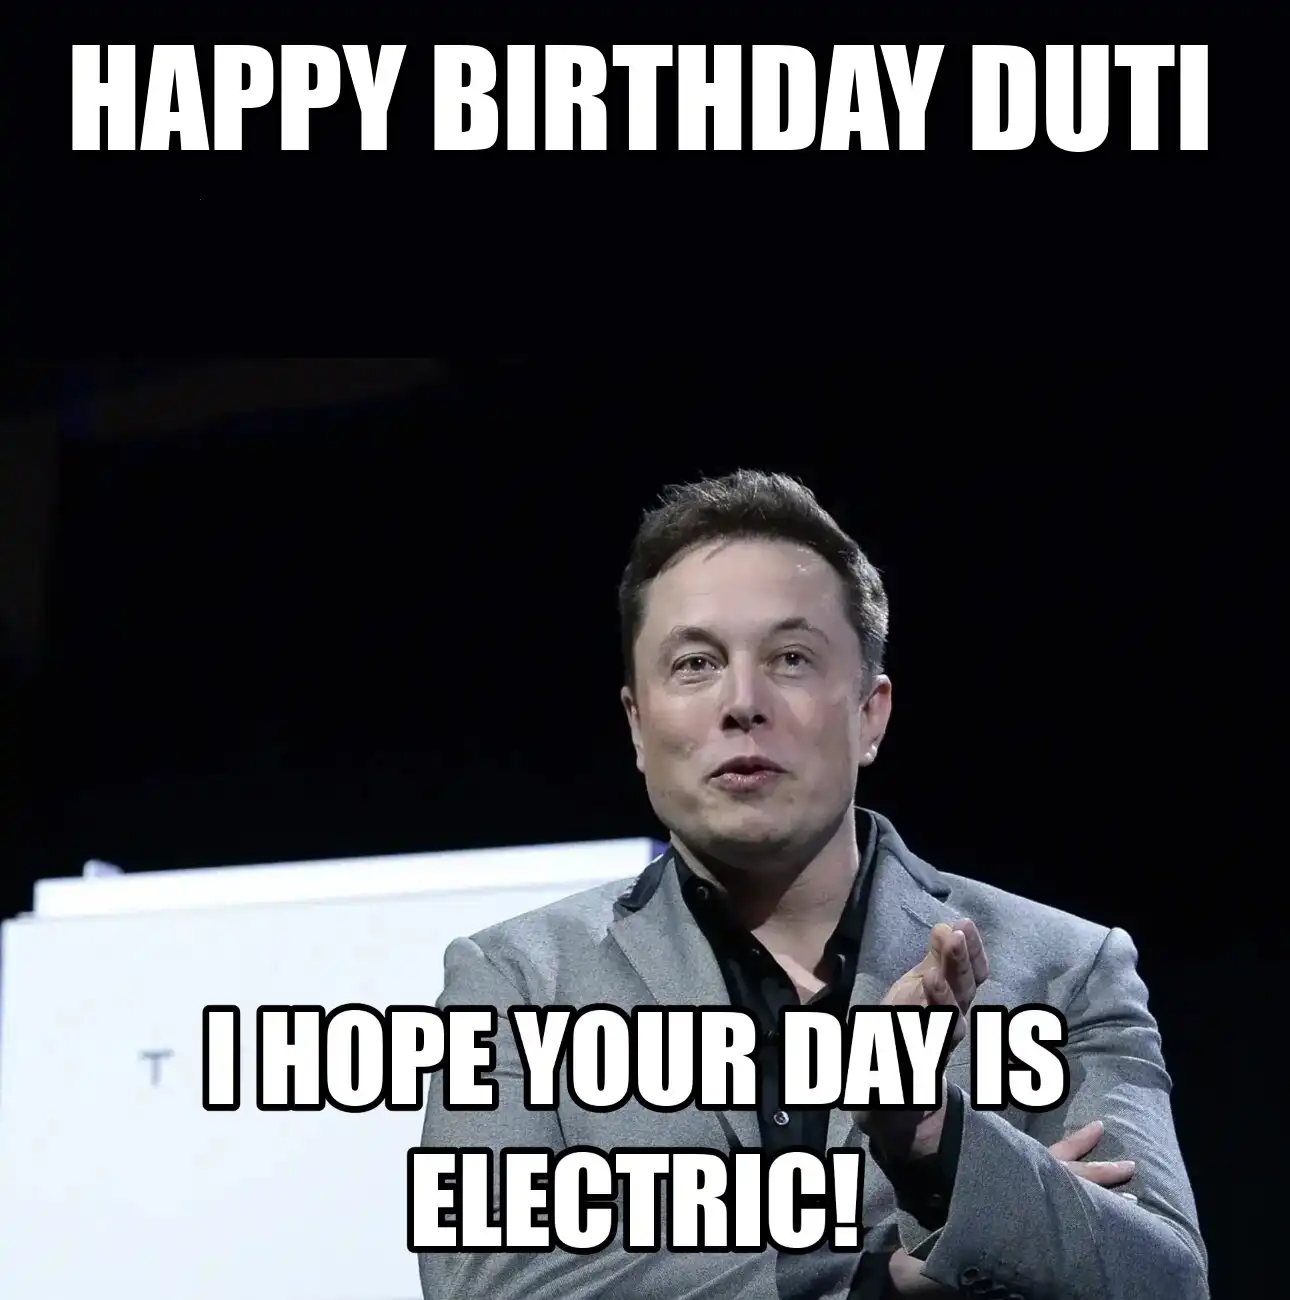 Happy Birthday Duti I Hope Your Day Is Electric Meme